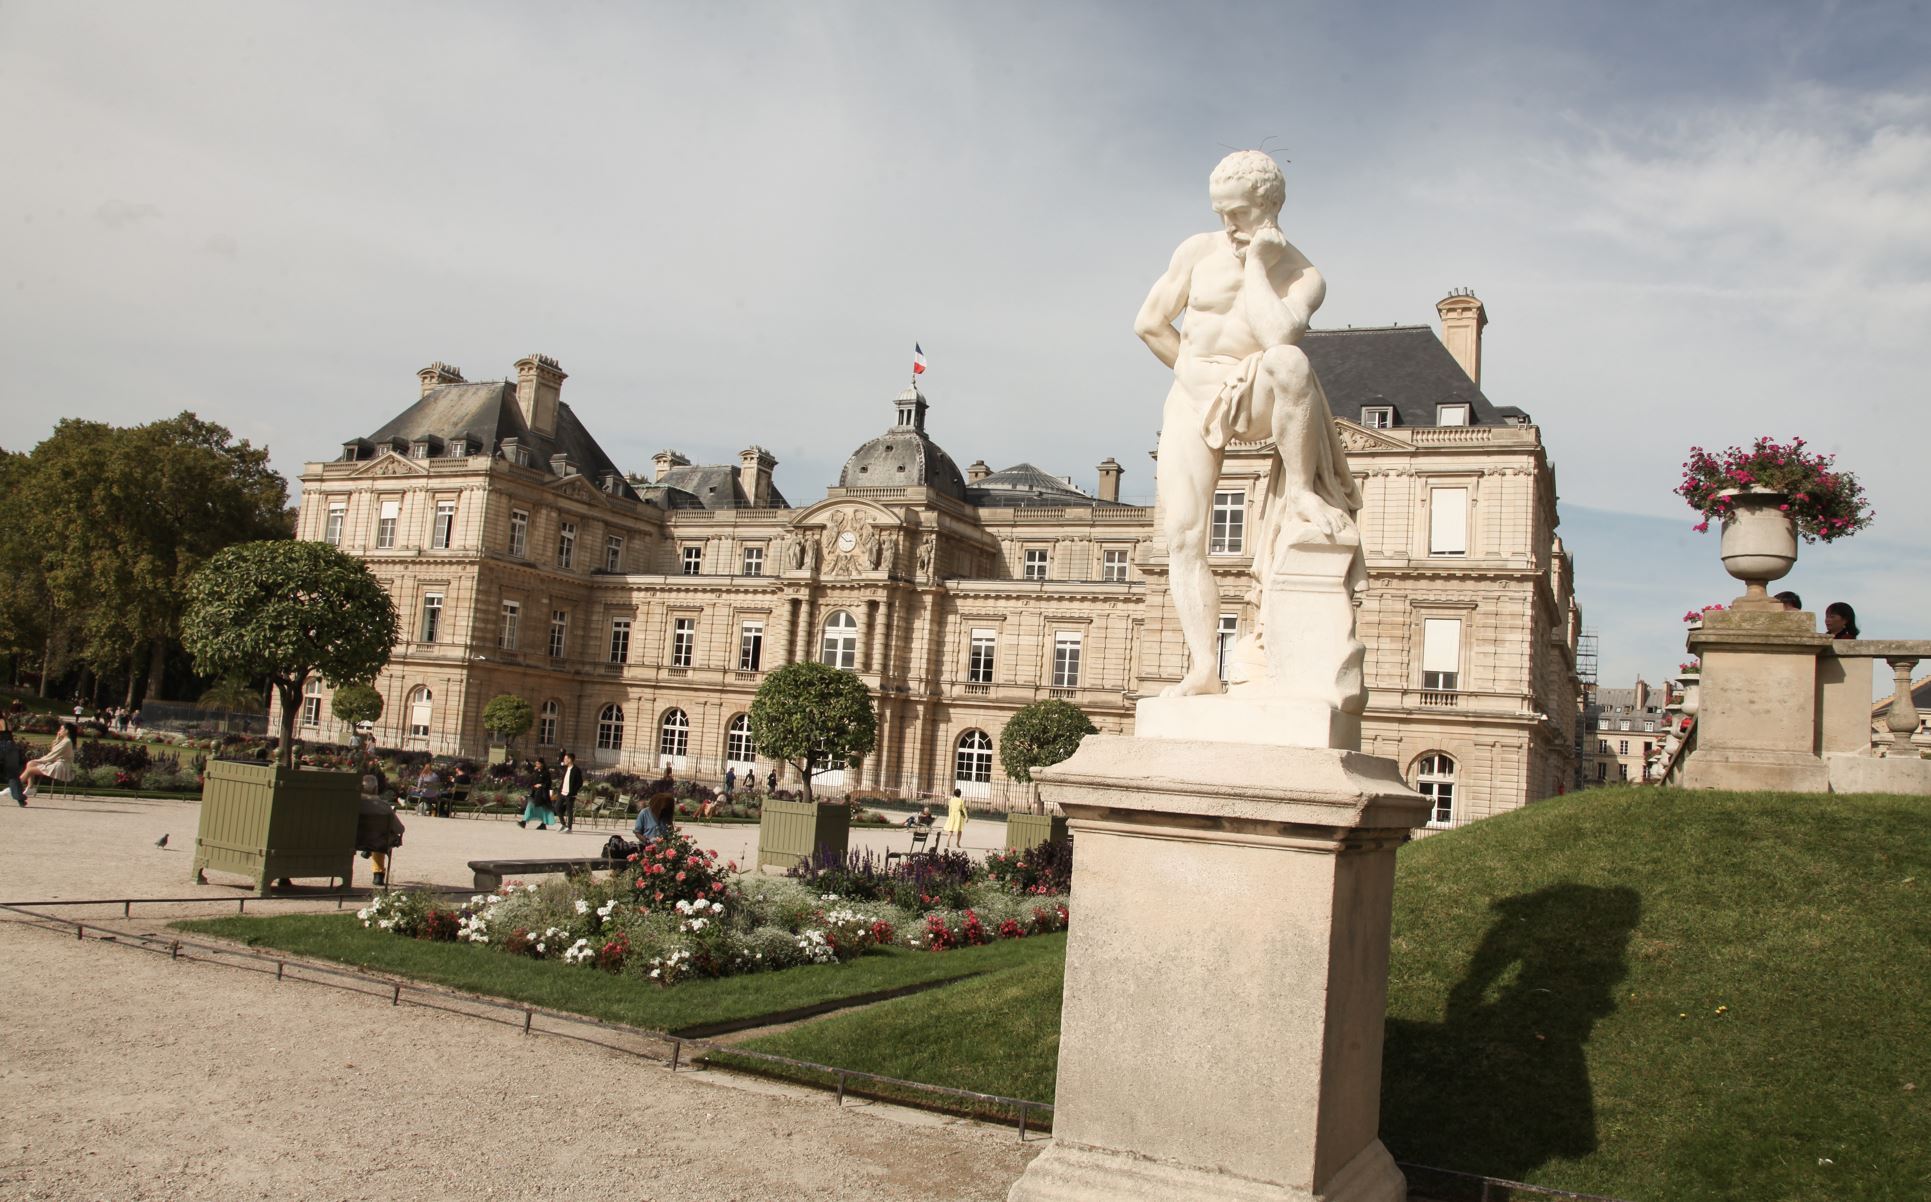 The Luxembourg Gardens, a place for Parisians to relax